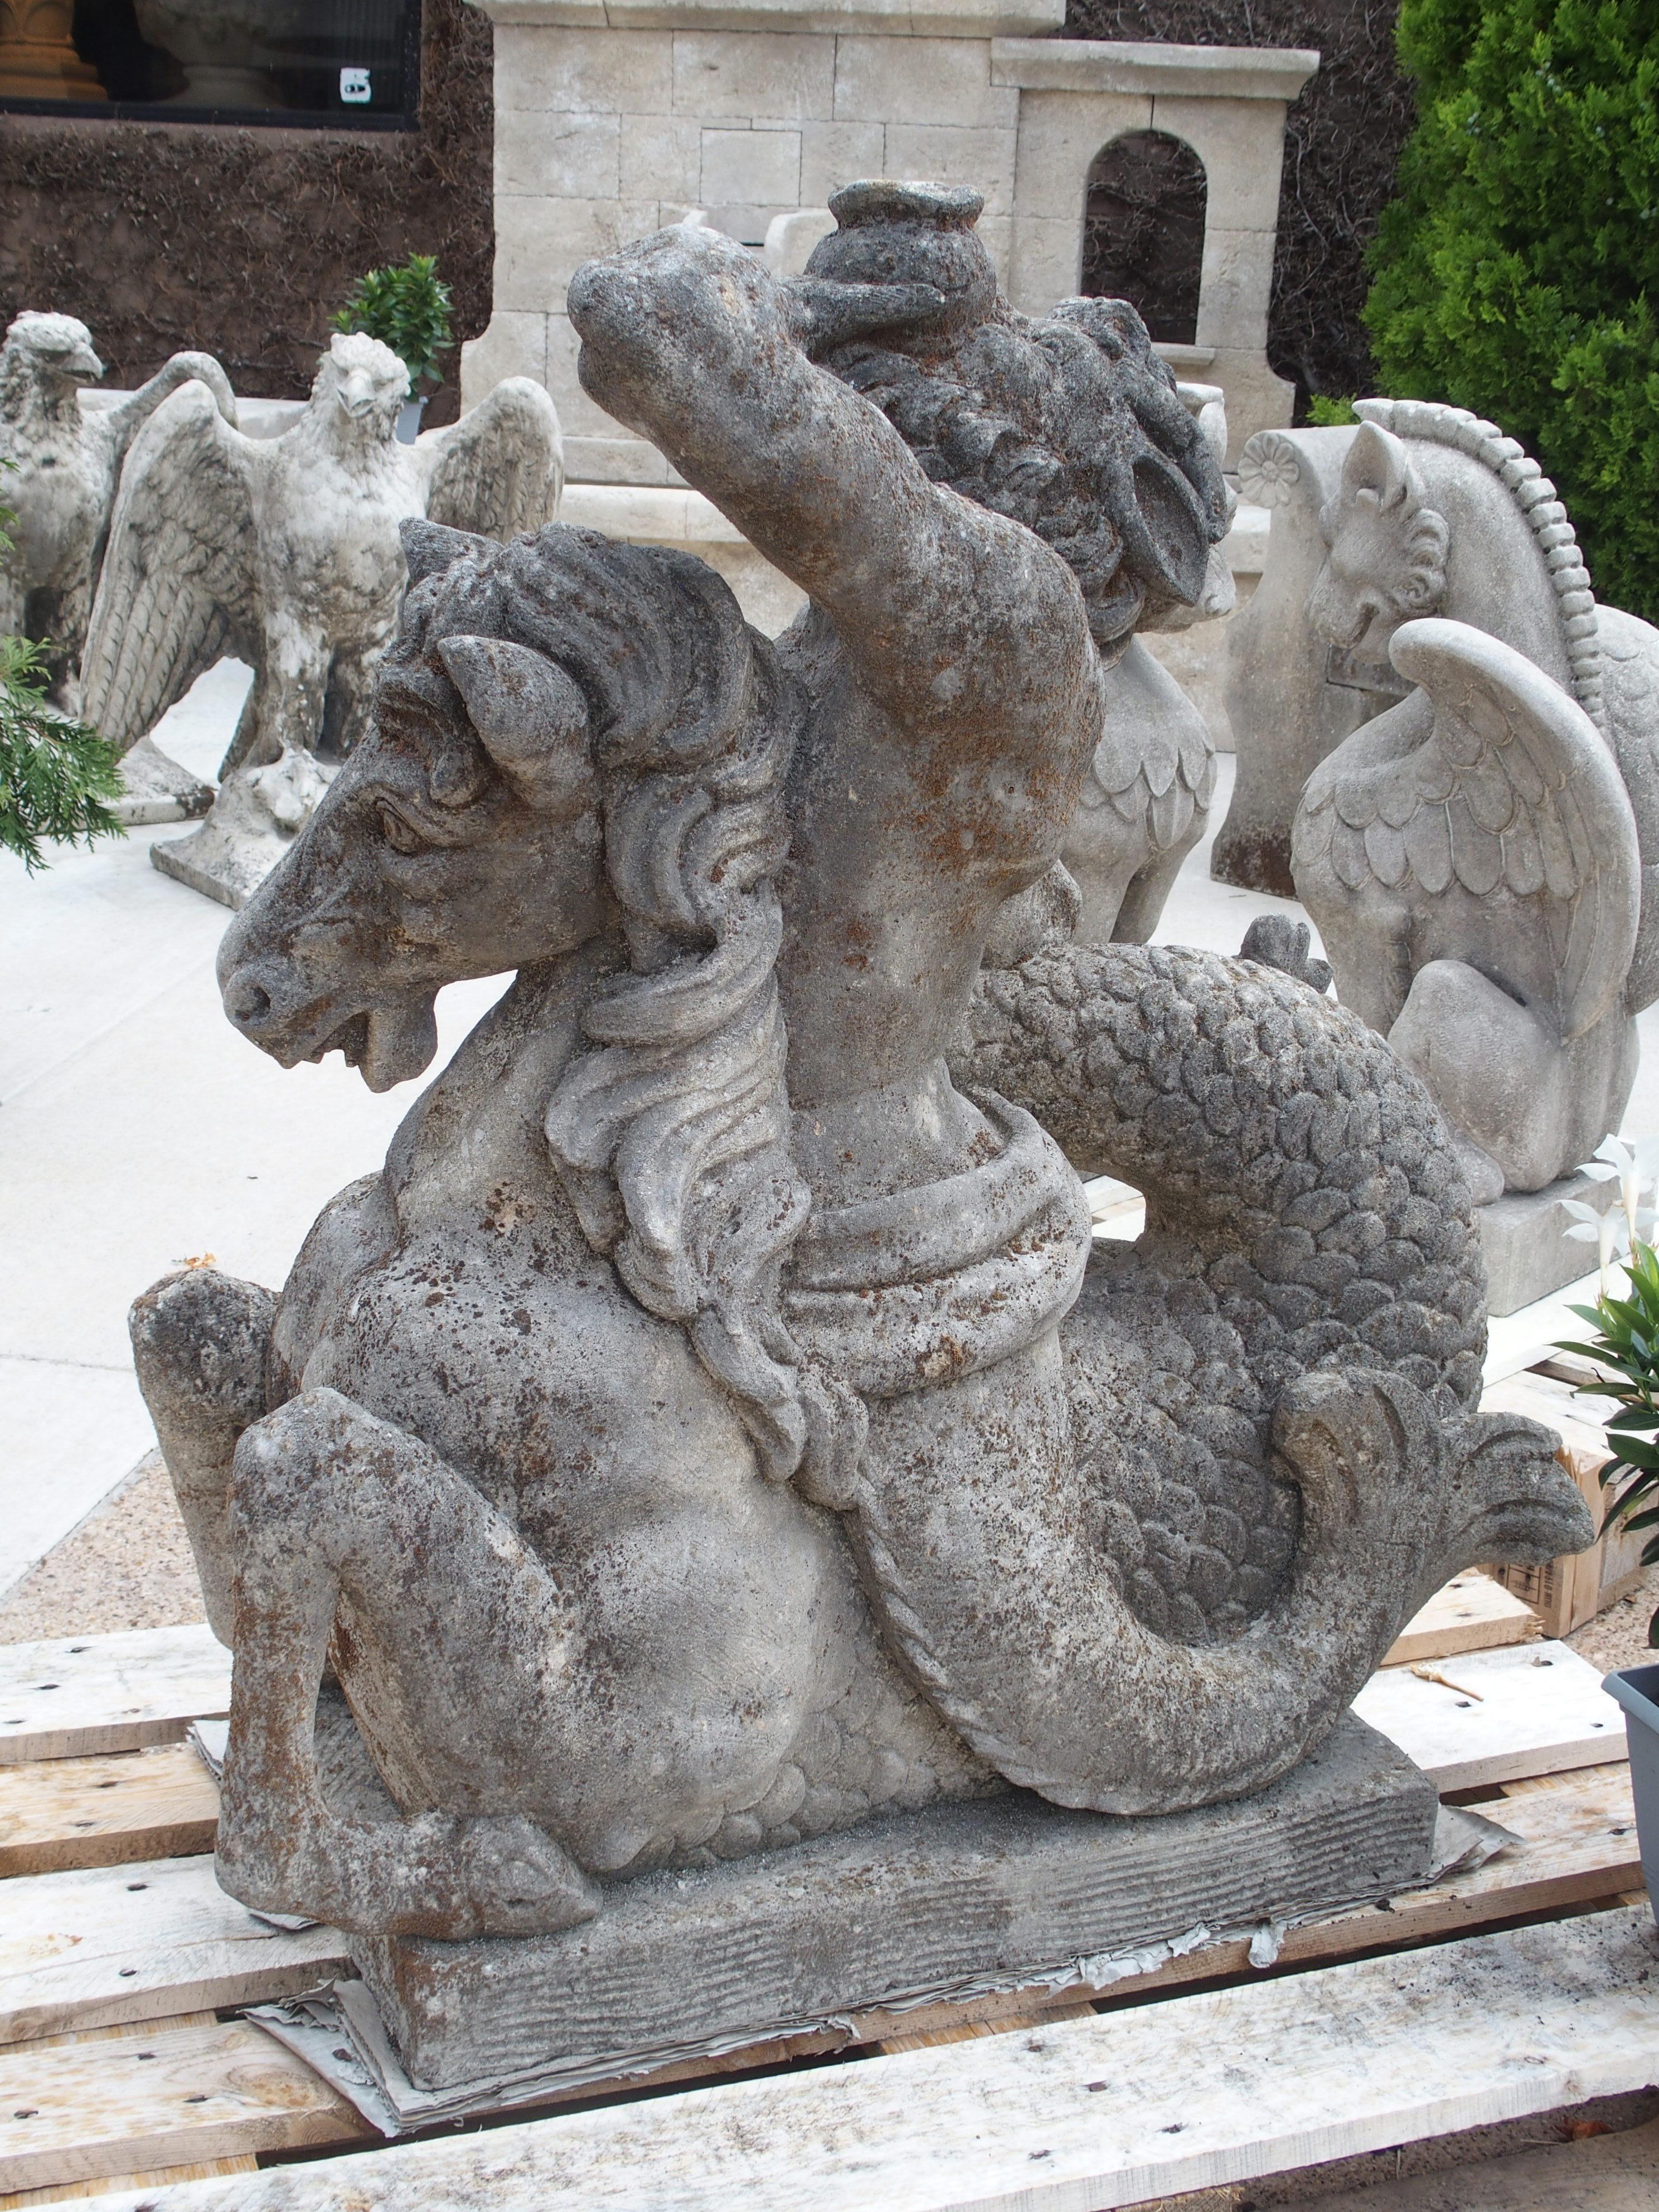 Hand-carved in Italy, this amazing limestone sculpture depicts Triton riding a seahorse. The sculpture sits on a rectangular plinth that is 2 ¾ inches thick (all carved from the same block of stone). The sides and top of the base have been patterned